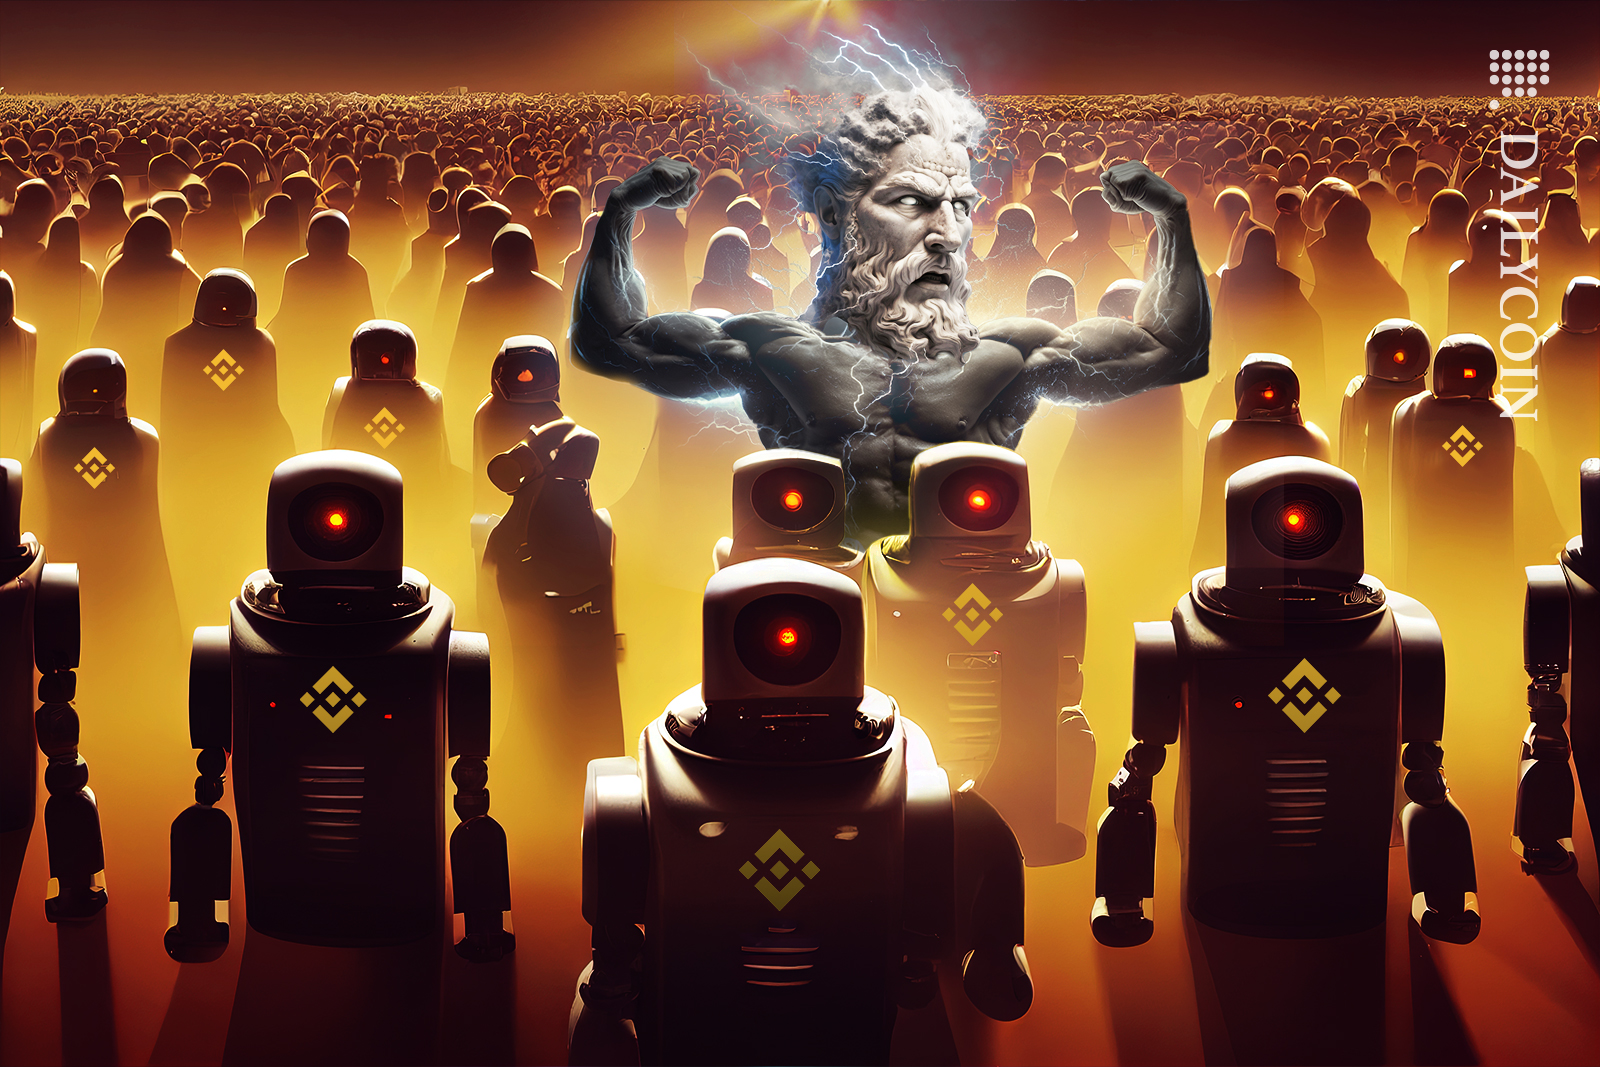 Army of binance robots with an angry lightning God in the middle.